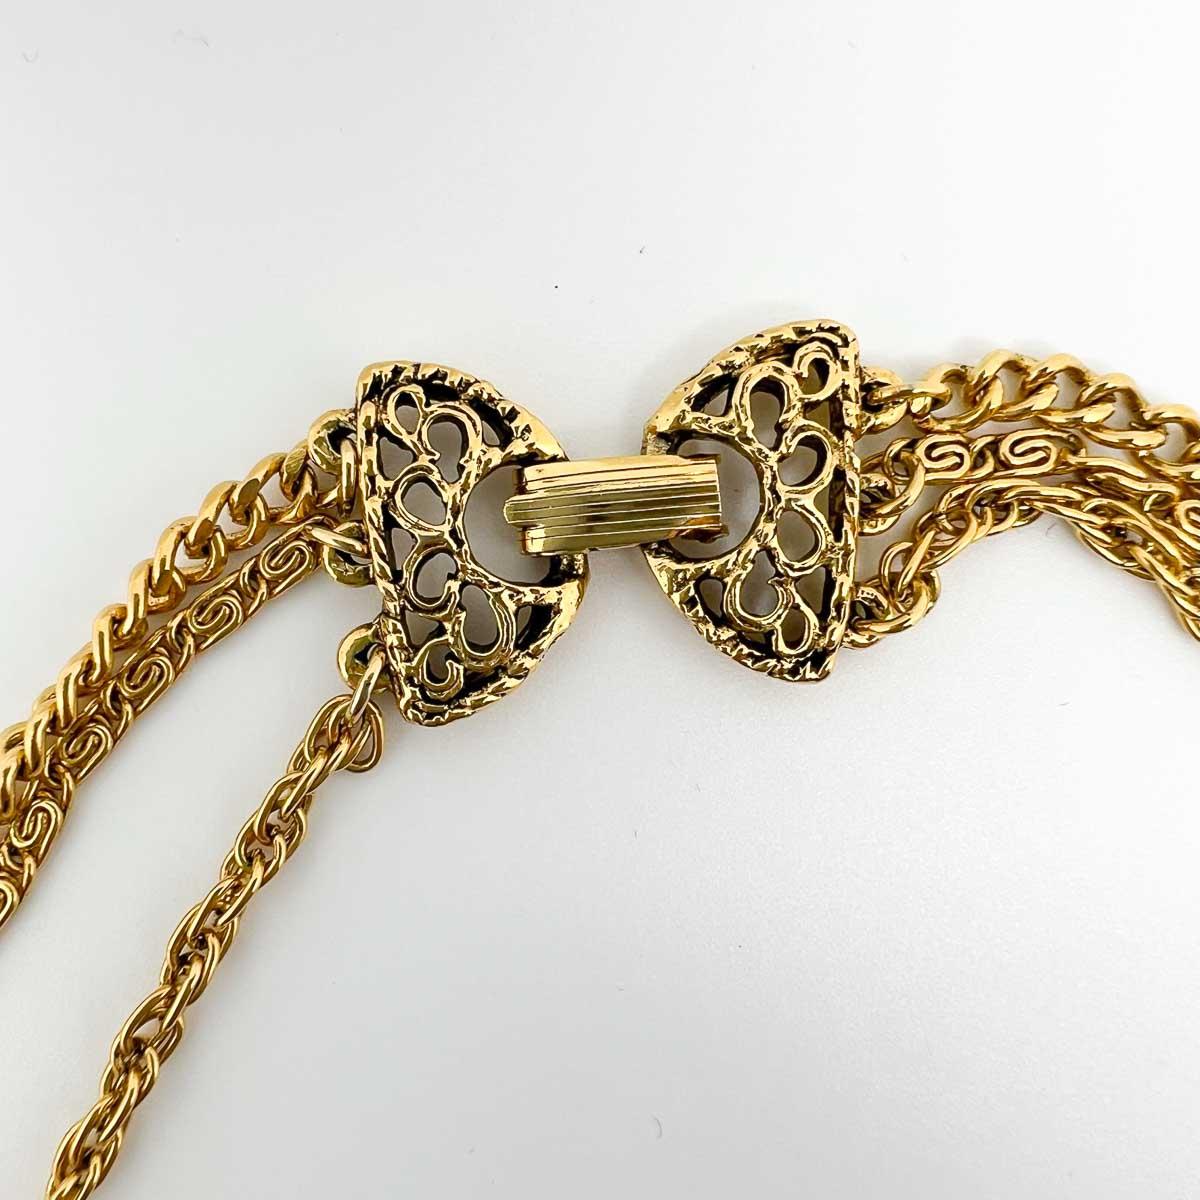 Vintage Goldette Amethyst Locket Chain Necklace 1960s In Good Condition For Sale In Wilmslow, GB